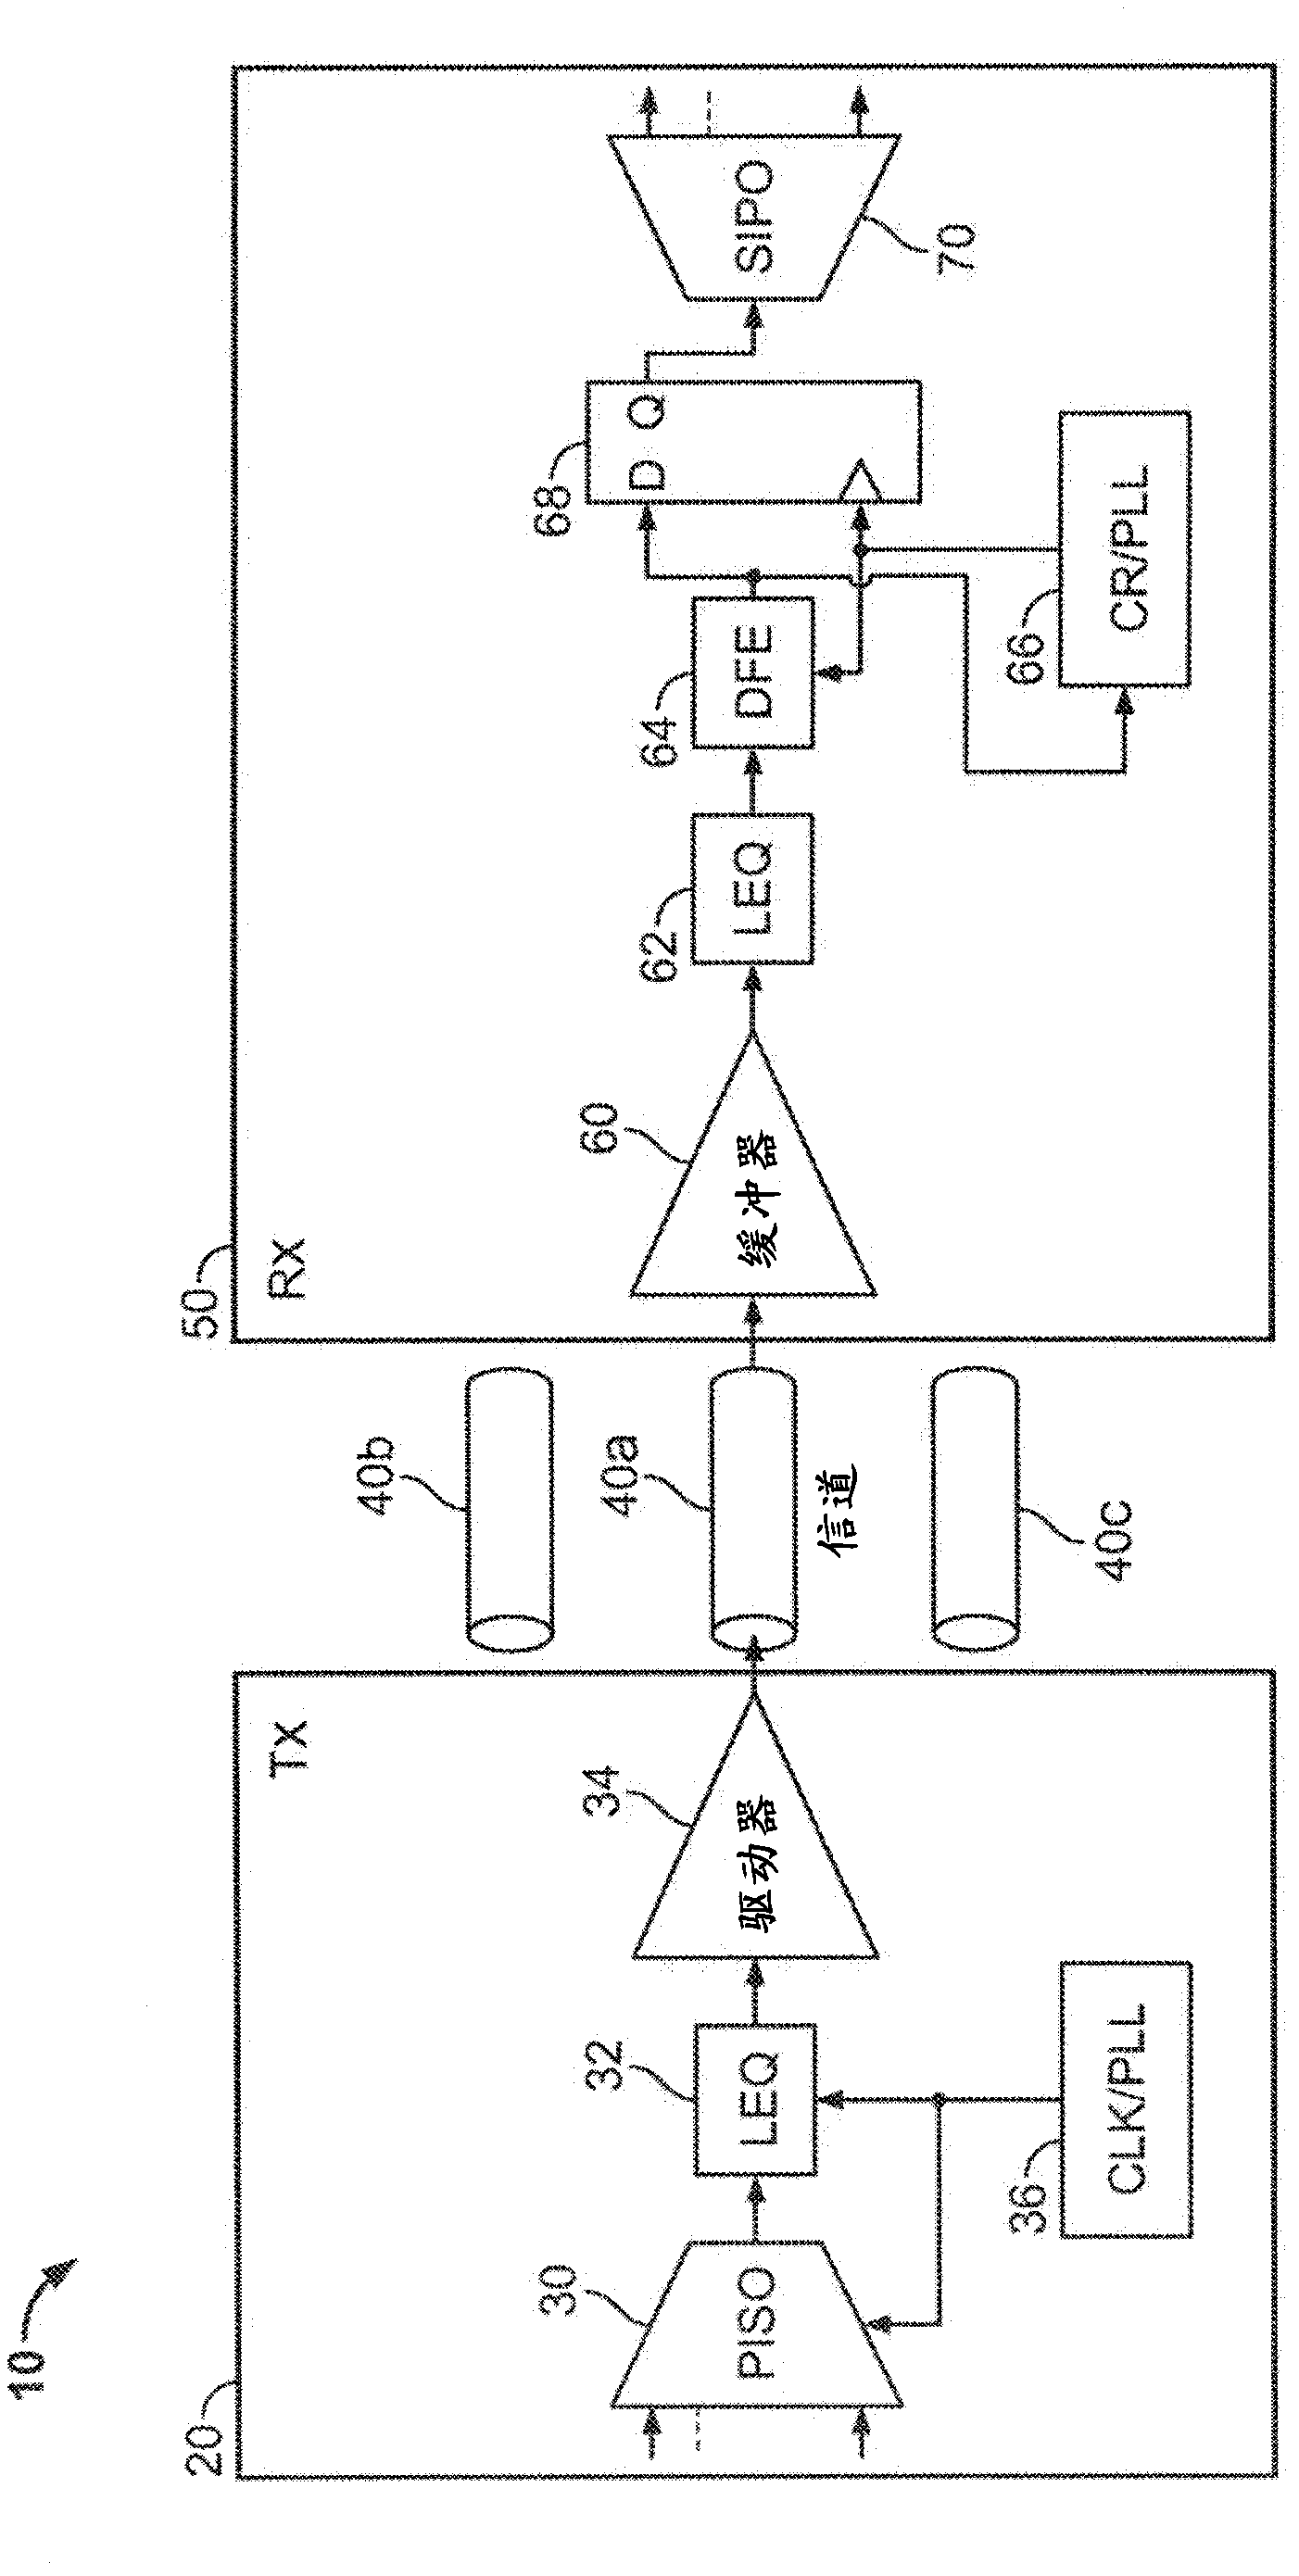 Circuitry on an integrated circuit for performing or facilitating oscilloscope, jitter, and/or bit-error-rate tester operations